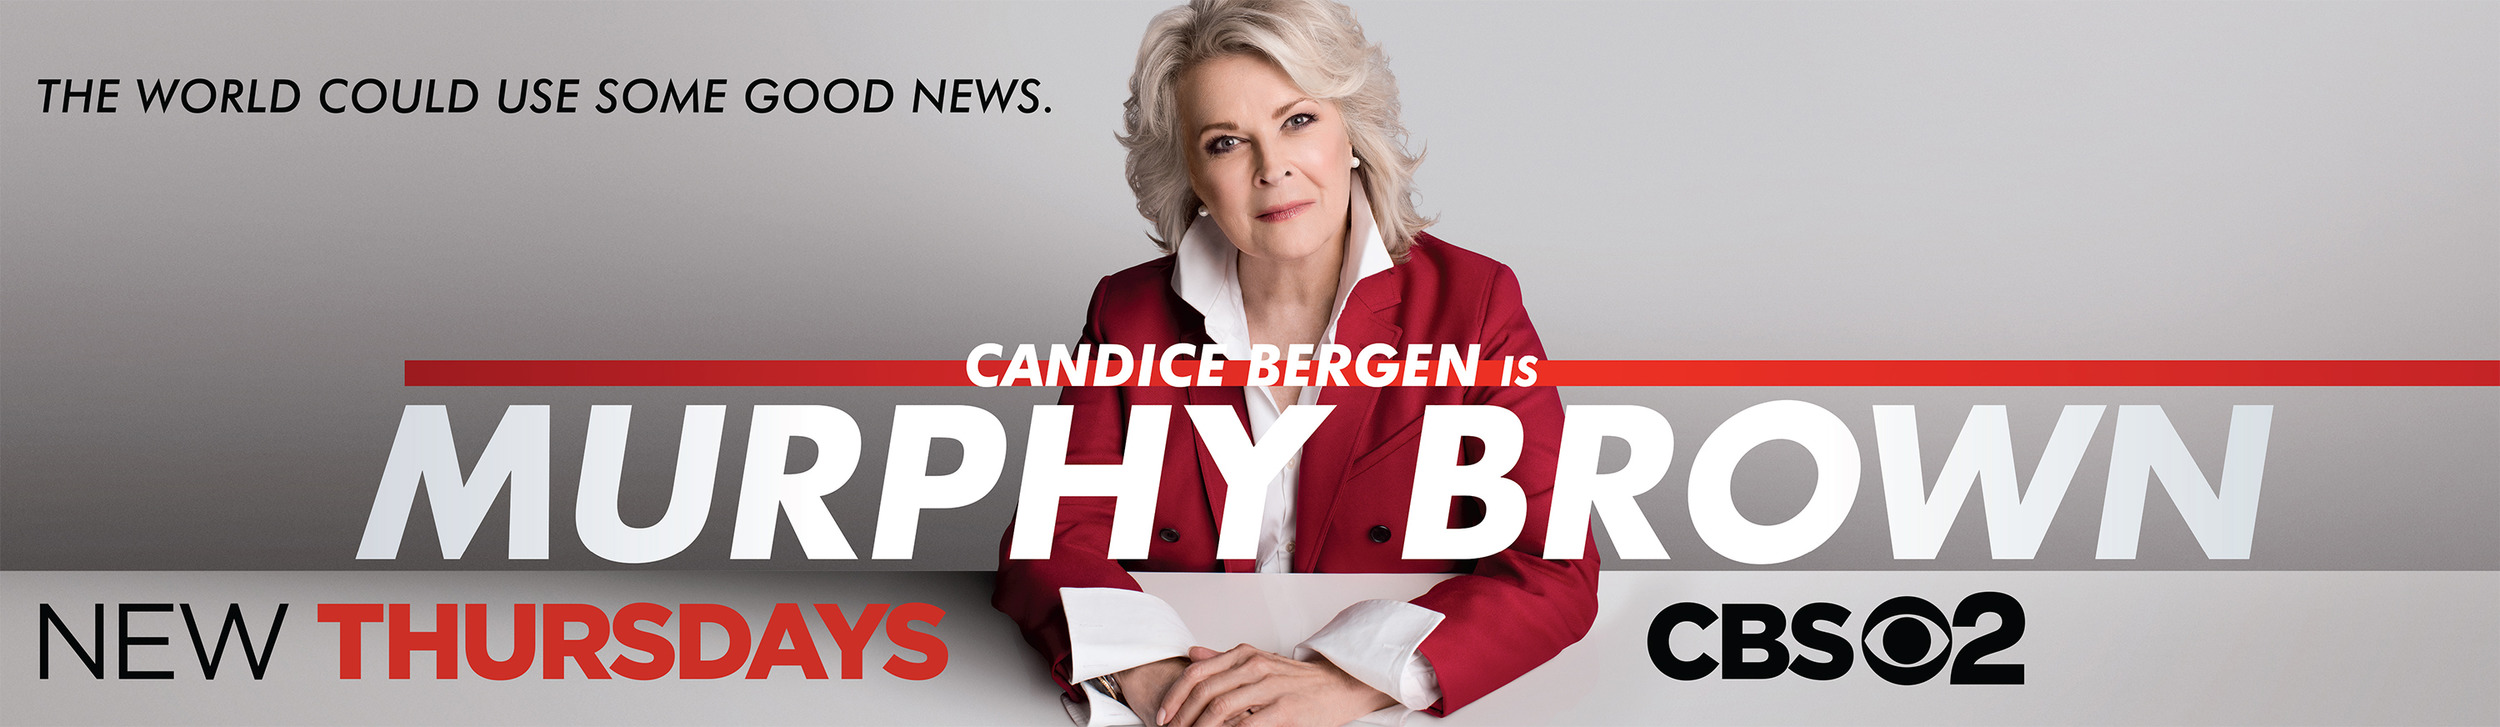 Mega Sized TV Poster Image for Murphy Brown (#2 of 2)